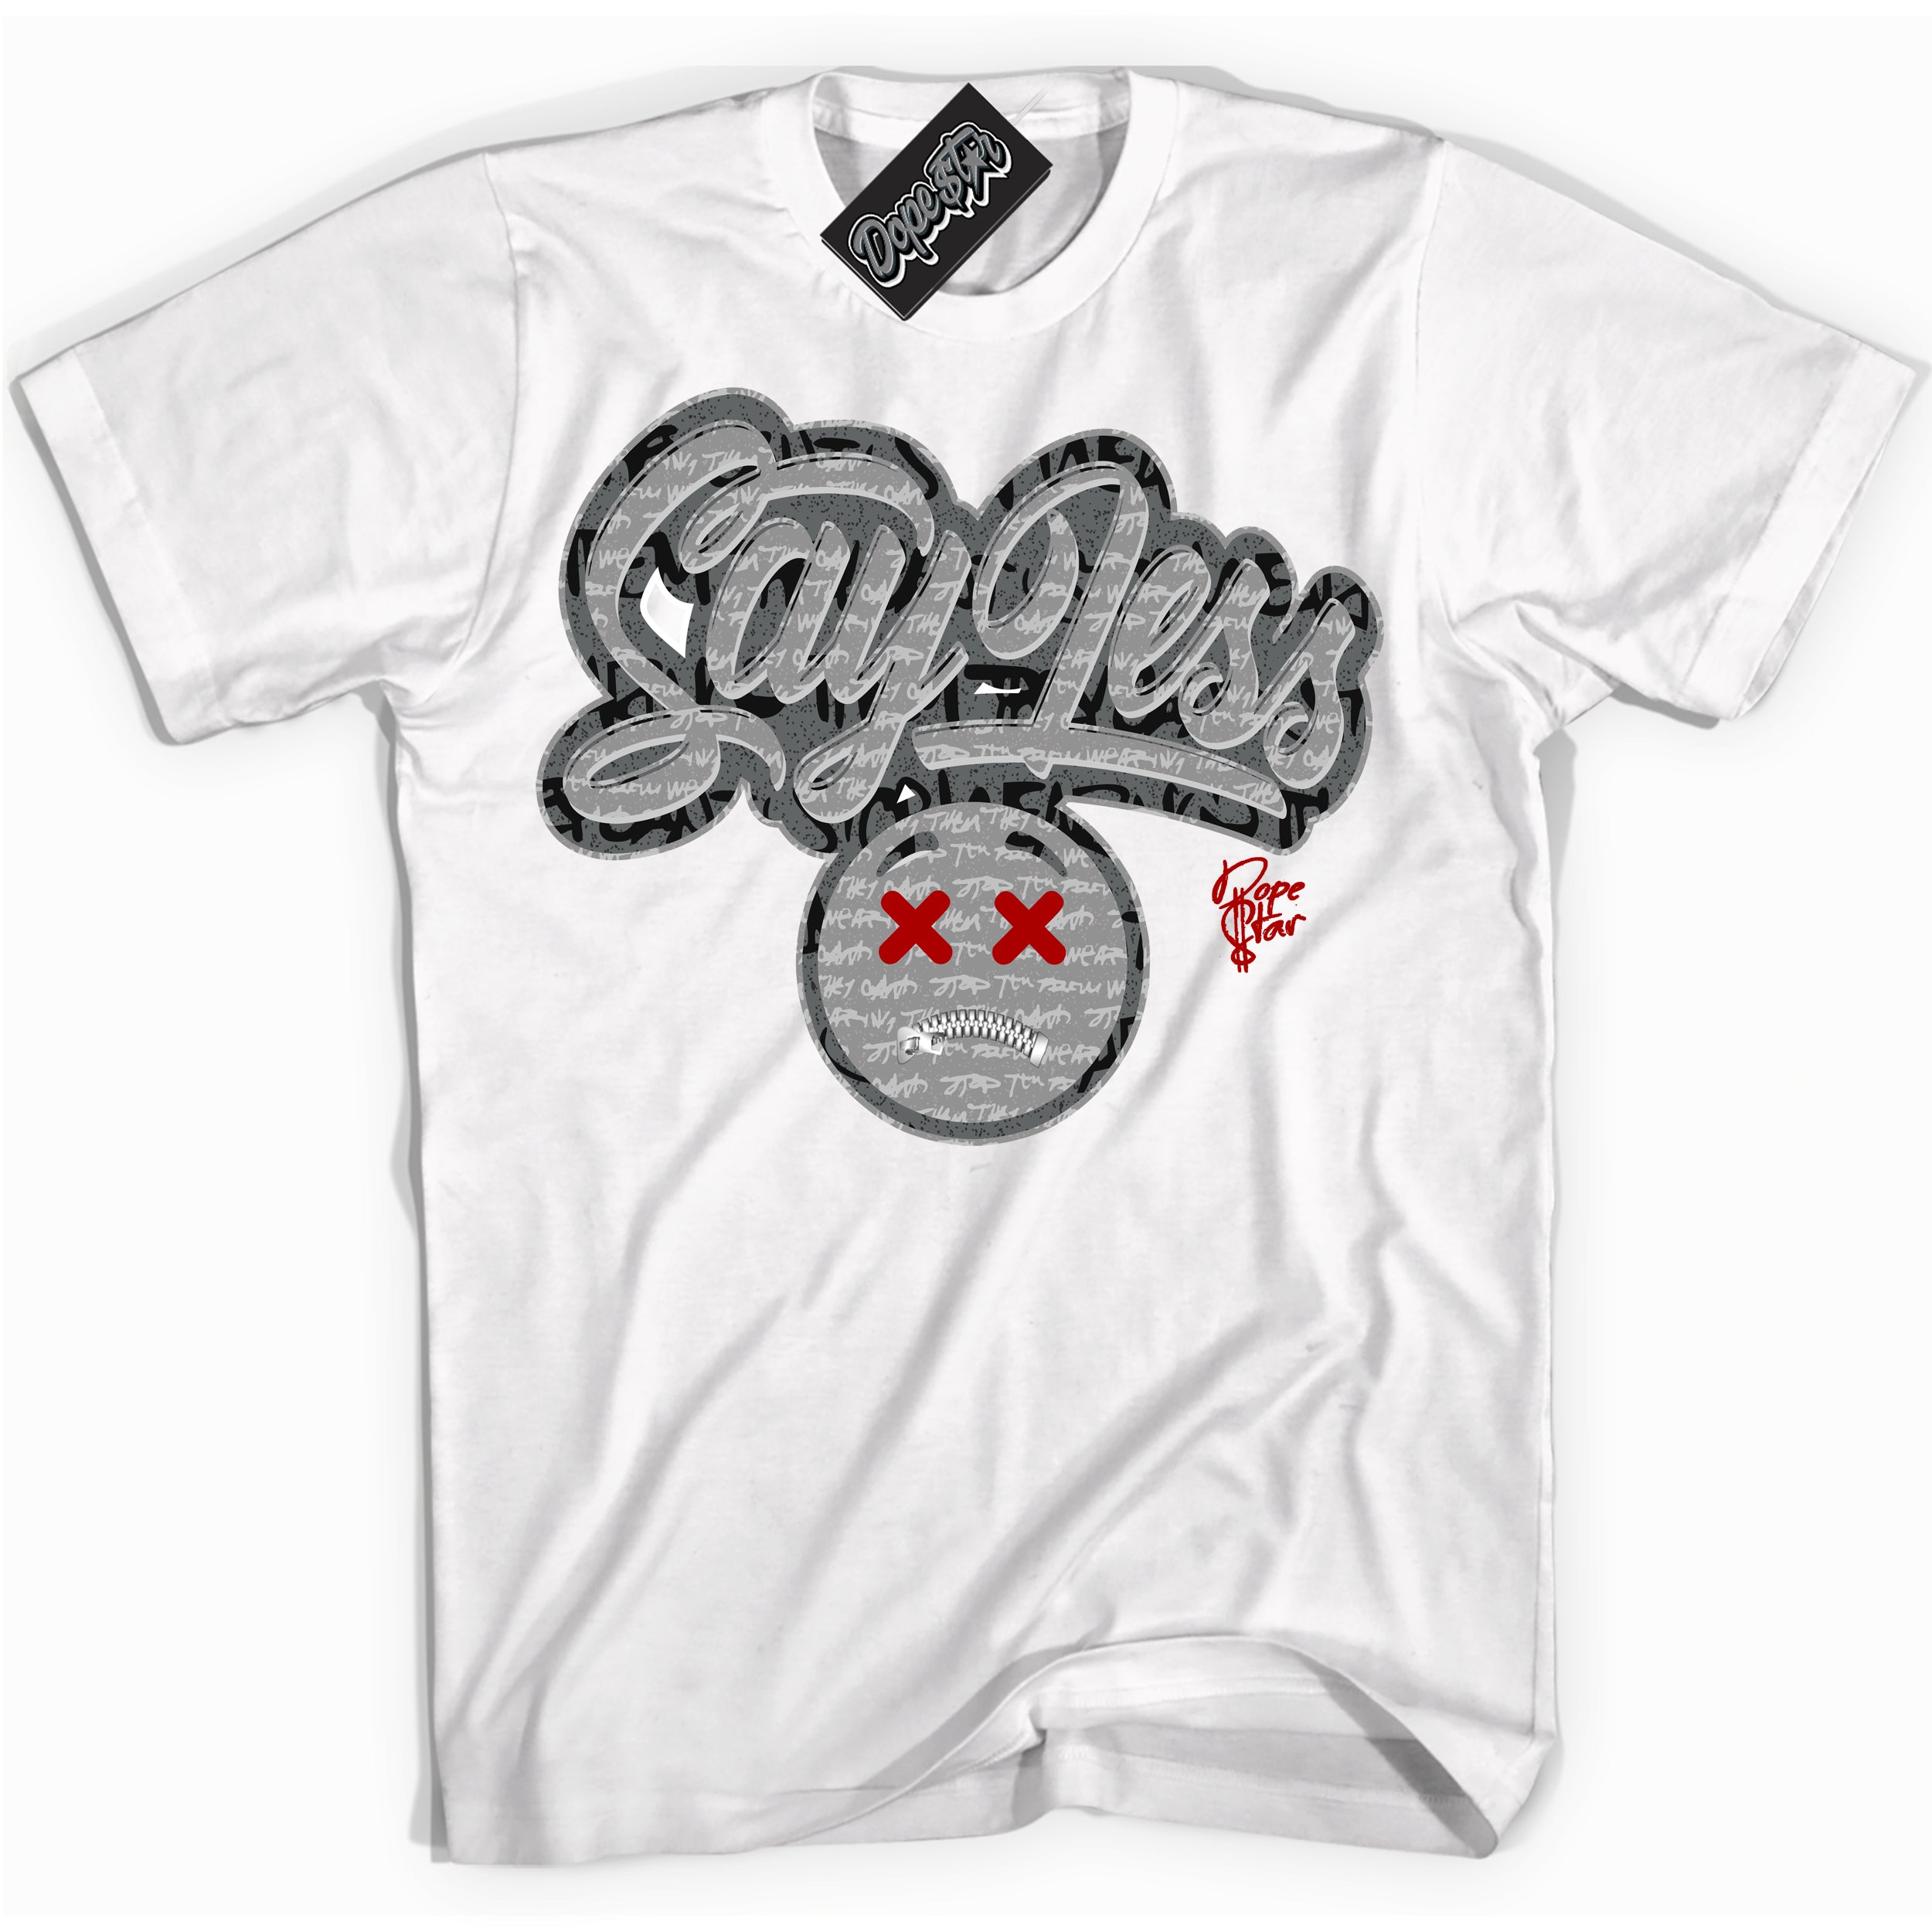 Cool White Shirt with “ Say Less ” design that perfectly matches Rebellionaire 1s Sneakers.